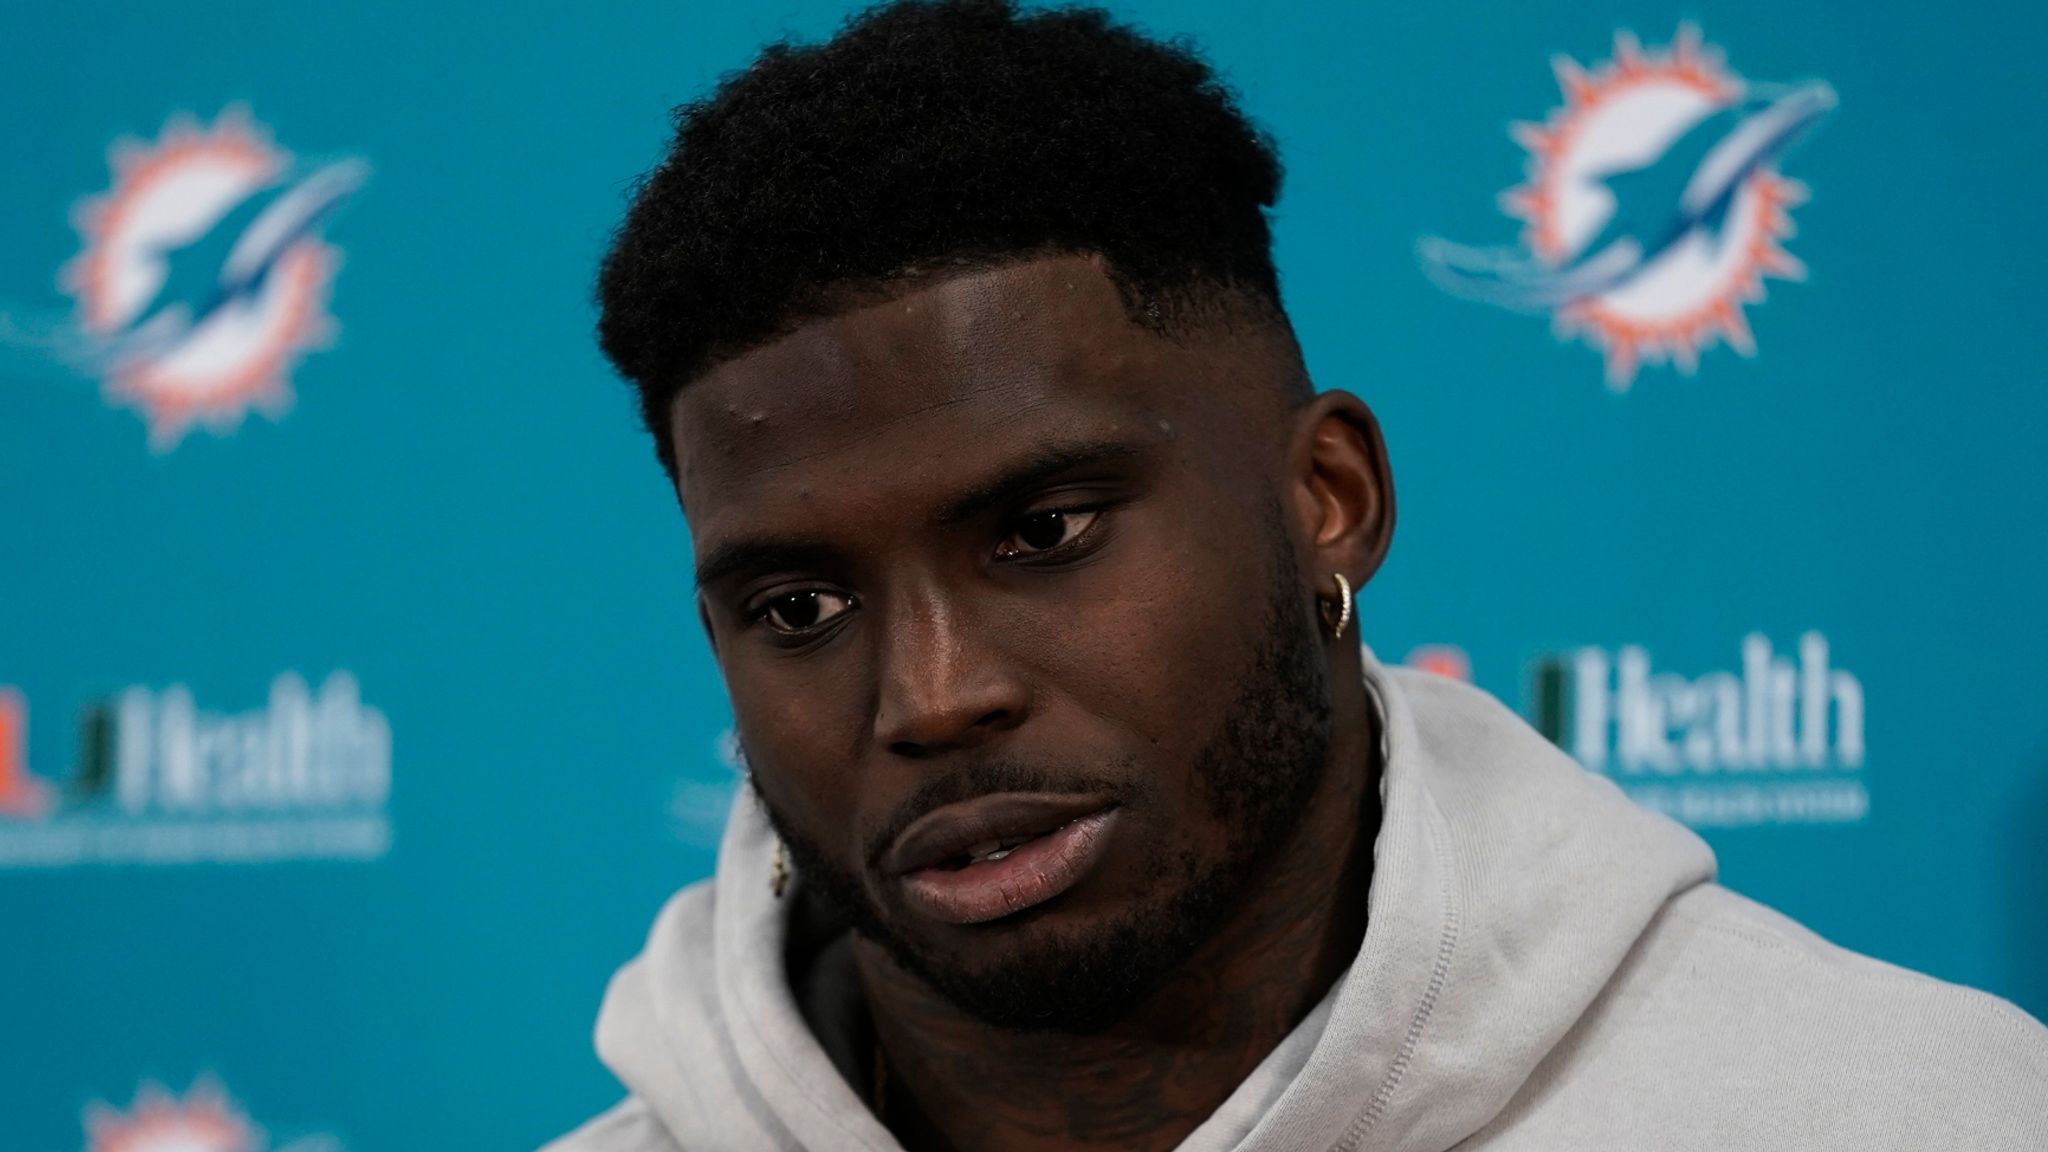 Tyreek Hill: Miami Dolphins wide receiver 'safe' after large fire at his South Florida home | NFL News | Sky Sports